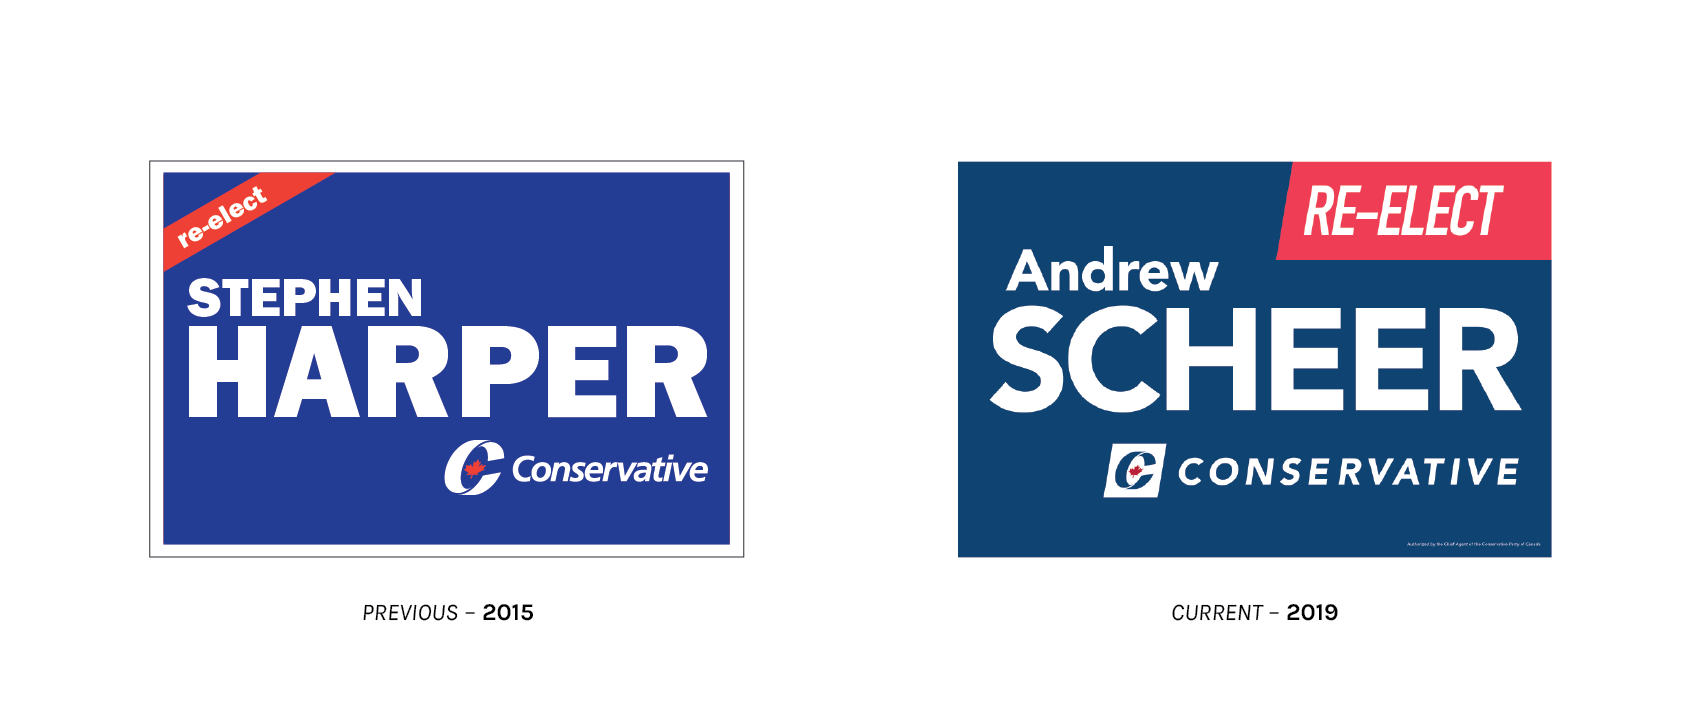 Conservative Party Lawn Signs